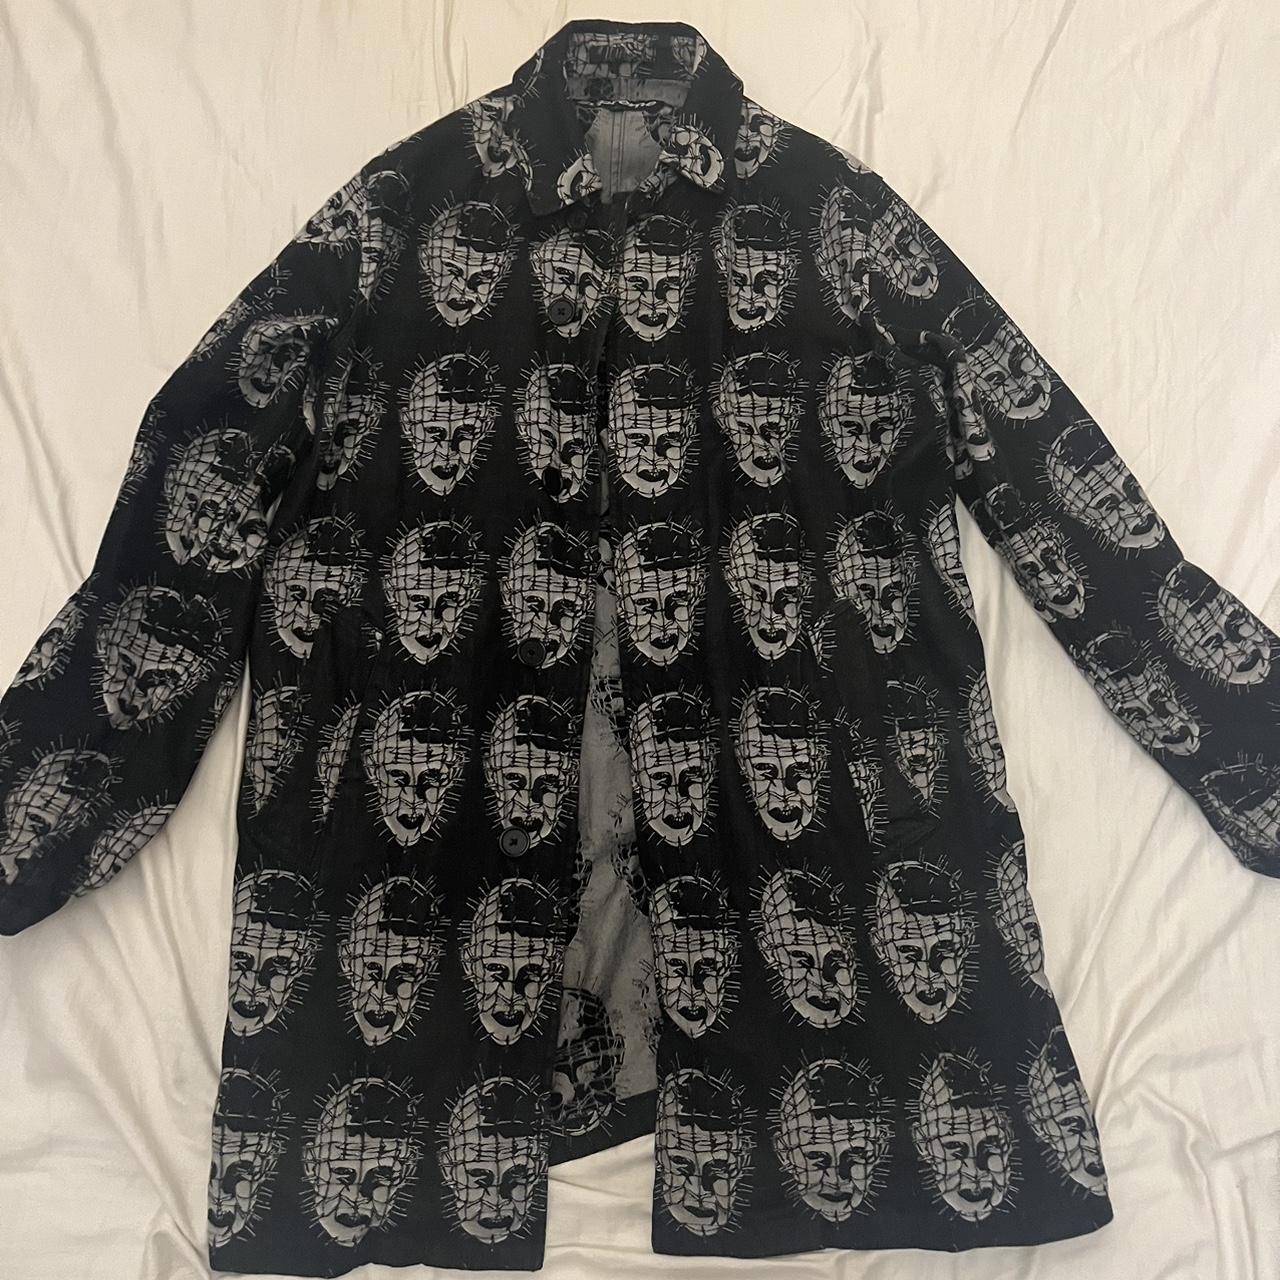 Supreme Hellraiser trench coat from 2018. One of the... - Depop